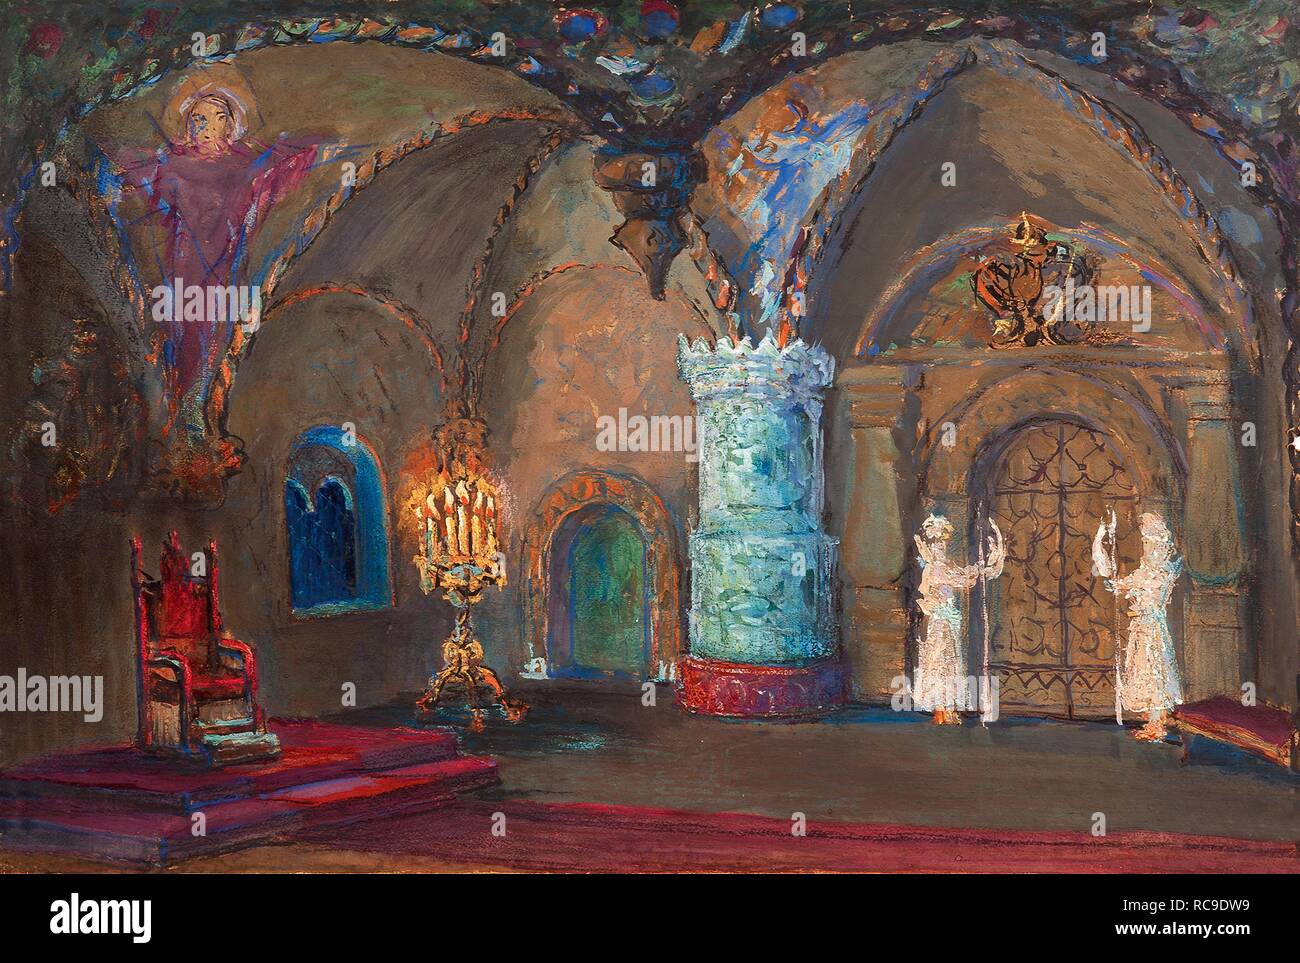 Stage design for the opera The Tsar's bride by N. Rimsky-Korsakov. Museum: PRIVATE COLLECTION. Author: Bomshtein, Alexander. Stock Photo